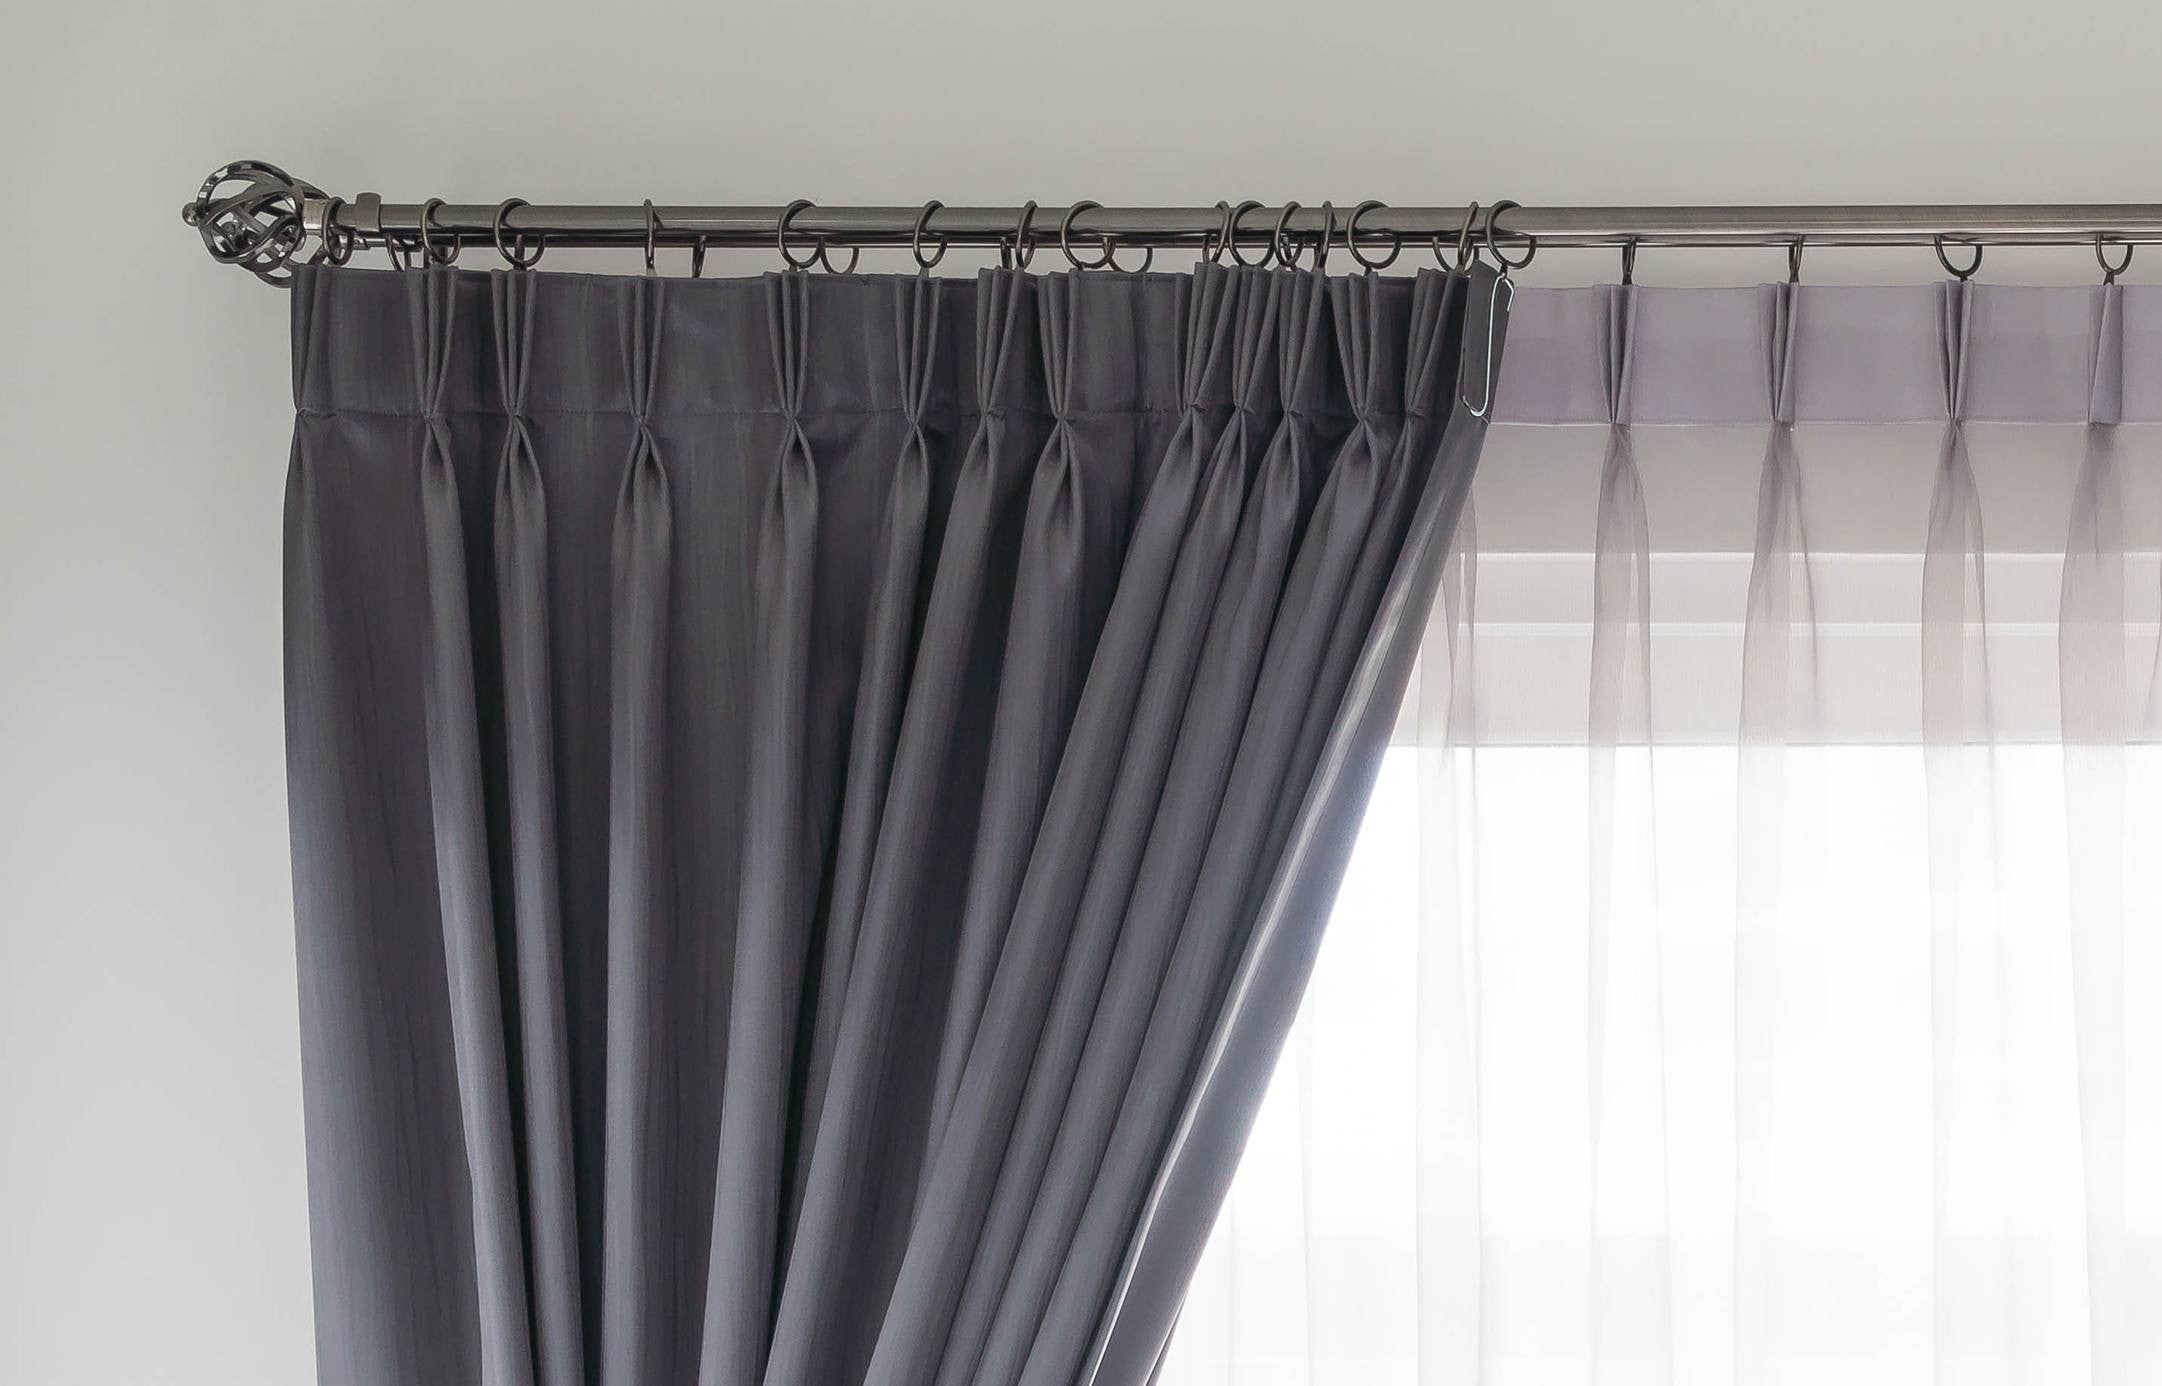 What curtain headings can be used with a curtain pole